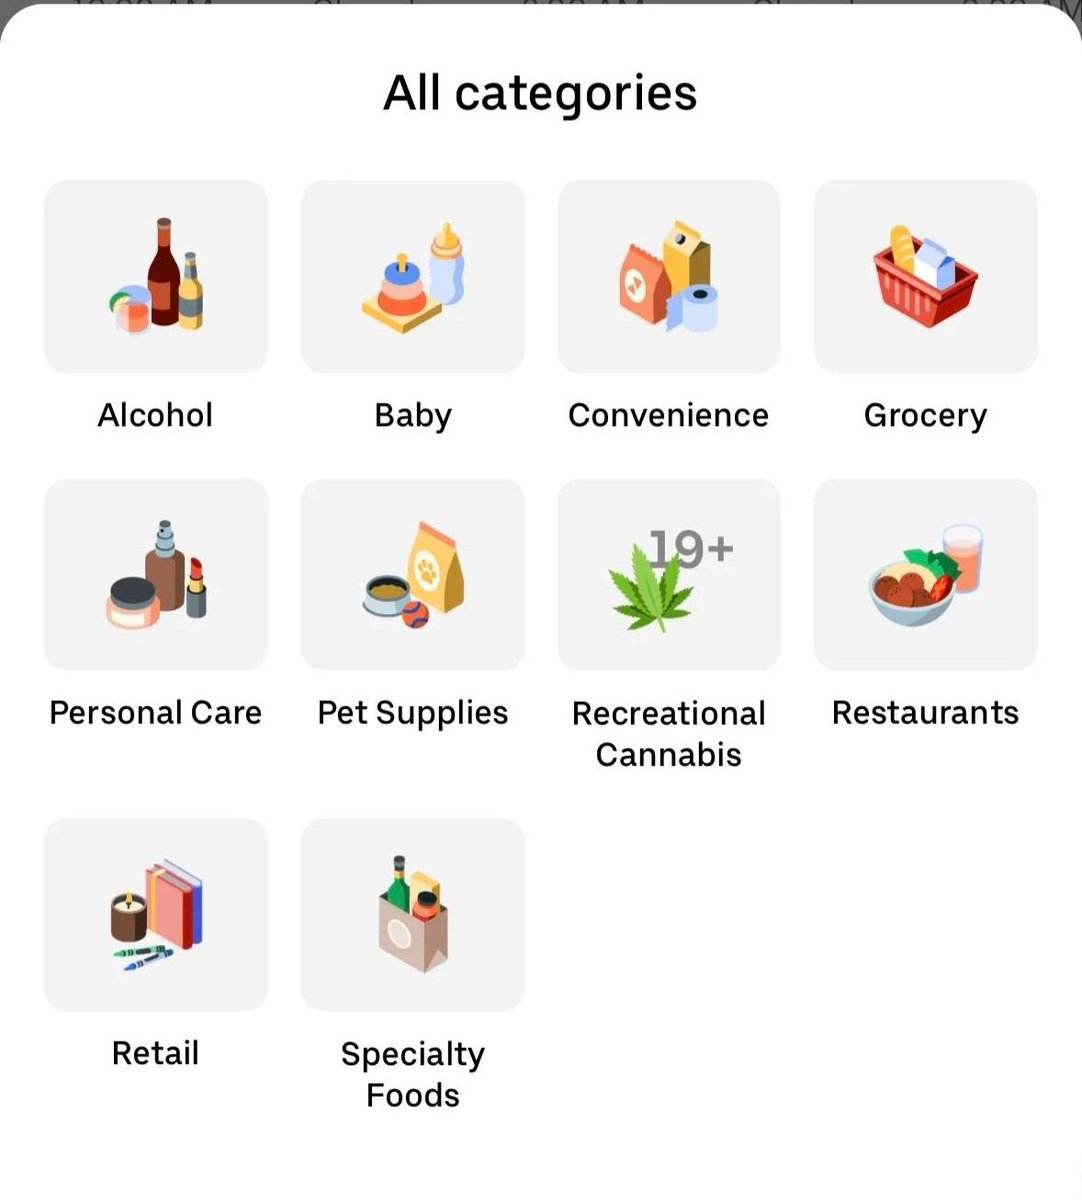 Uber Eats in Canada now has a recreational cannabis option for Canadians over the age of 19.

#CannabisReformIreland